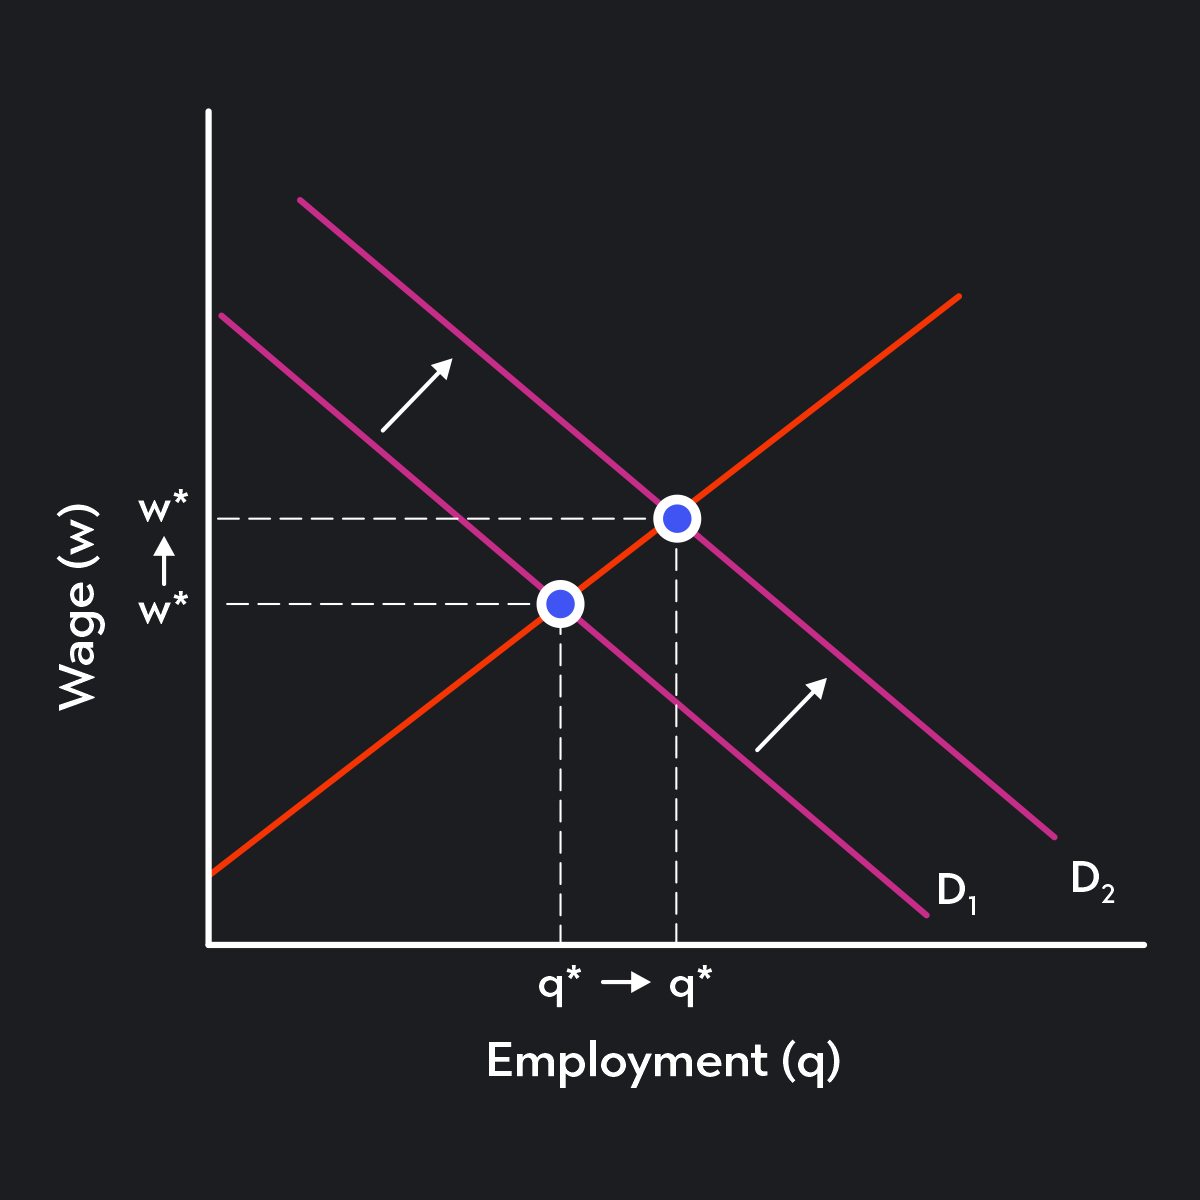 Graph showing an outward (rightward) shift  of the labor demand curve